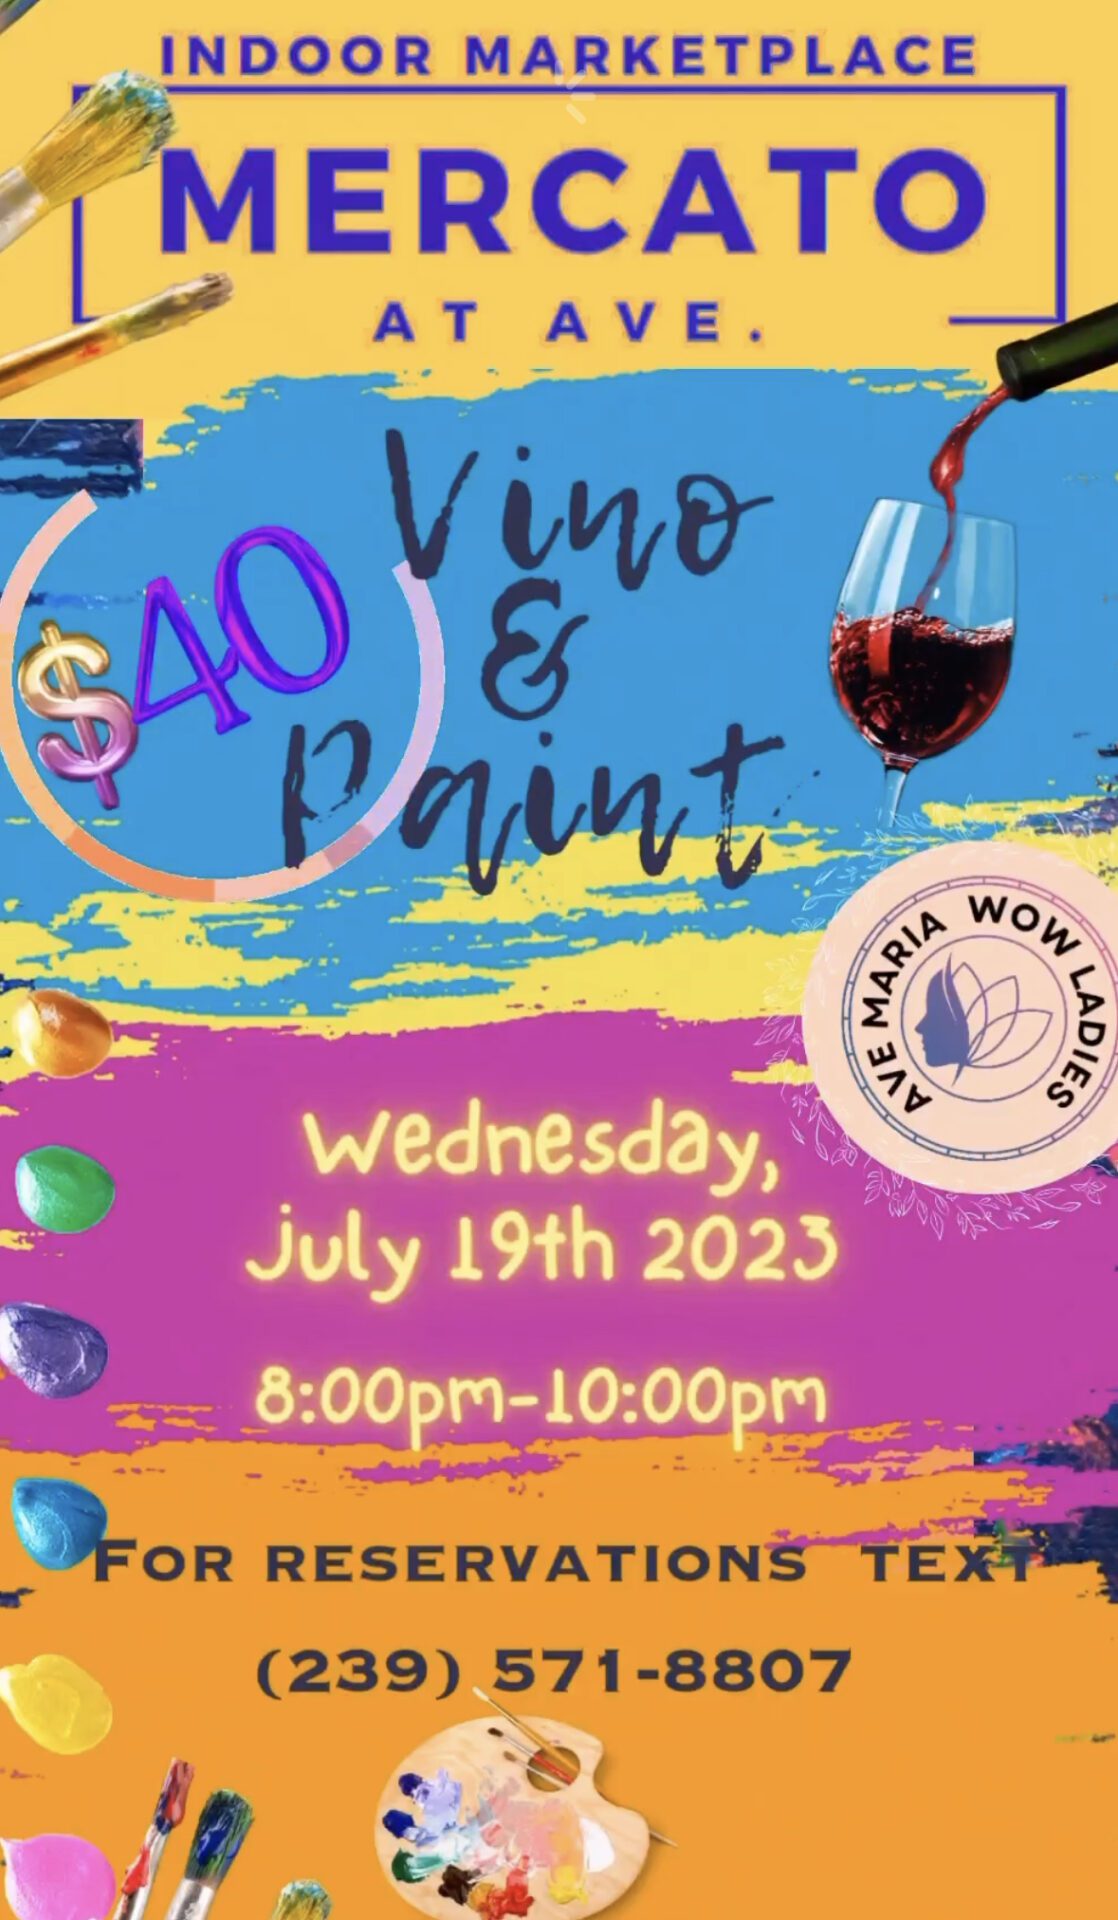 Mercato at Ave Vino & Paint Event Flyer